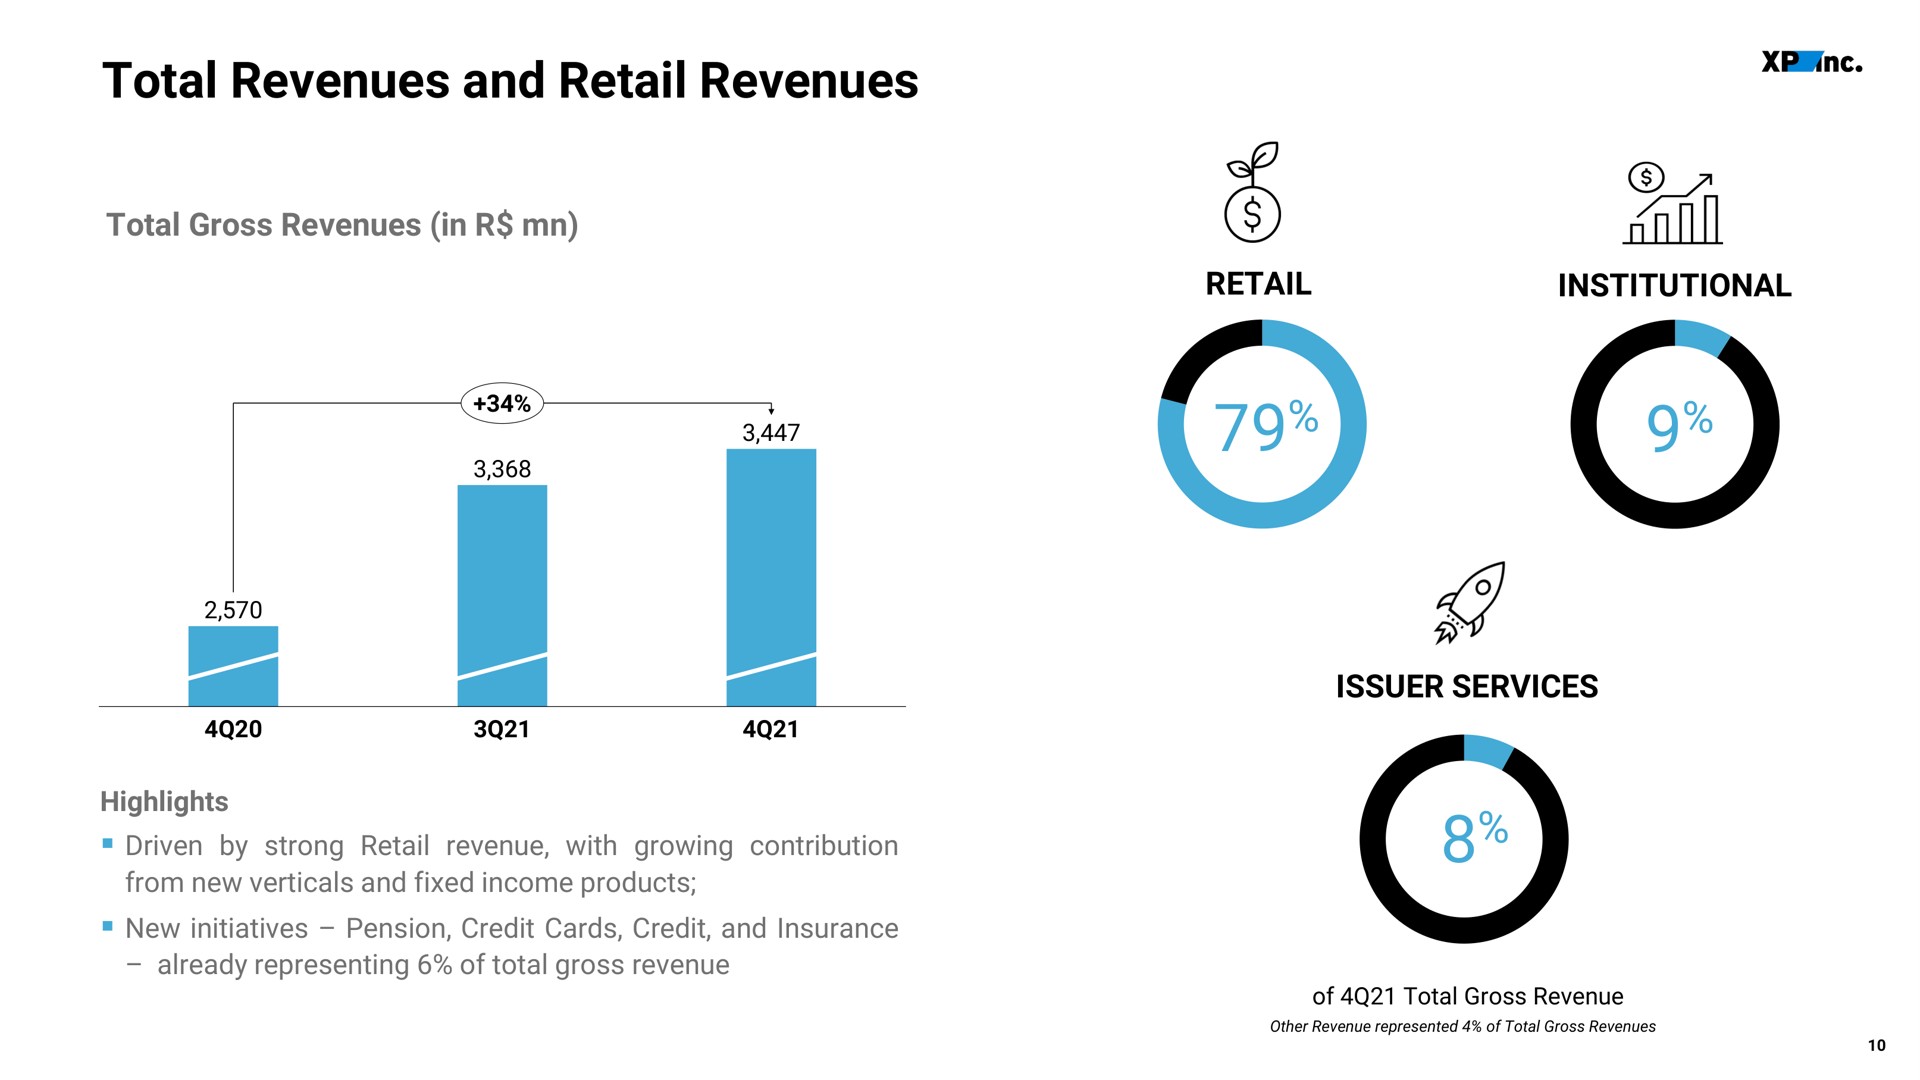 total revenues and retail revenues all | XP Inc